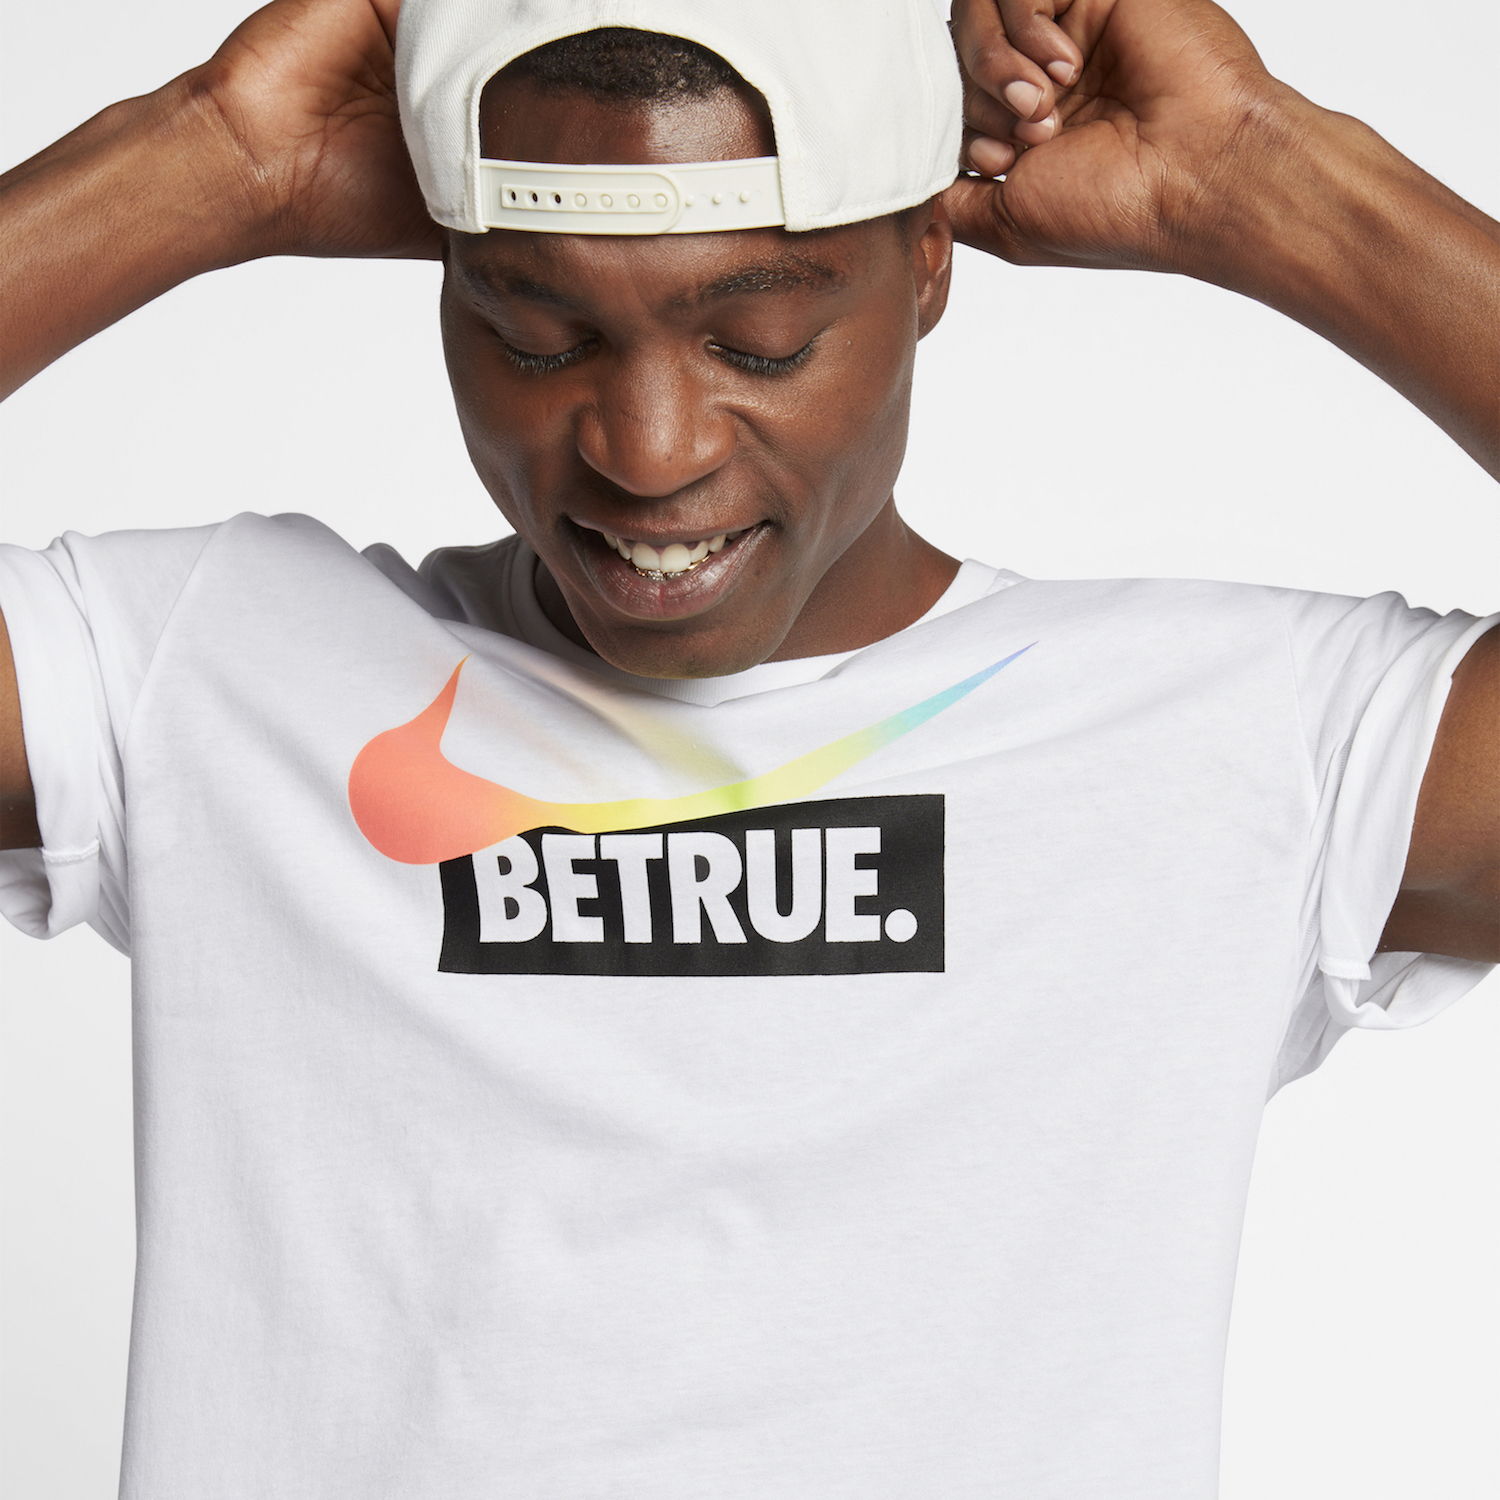 nike BETRUE 2017 collection t-shirt 1